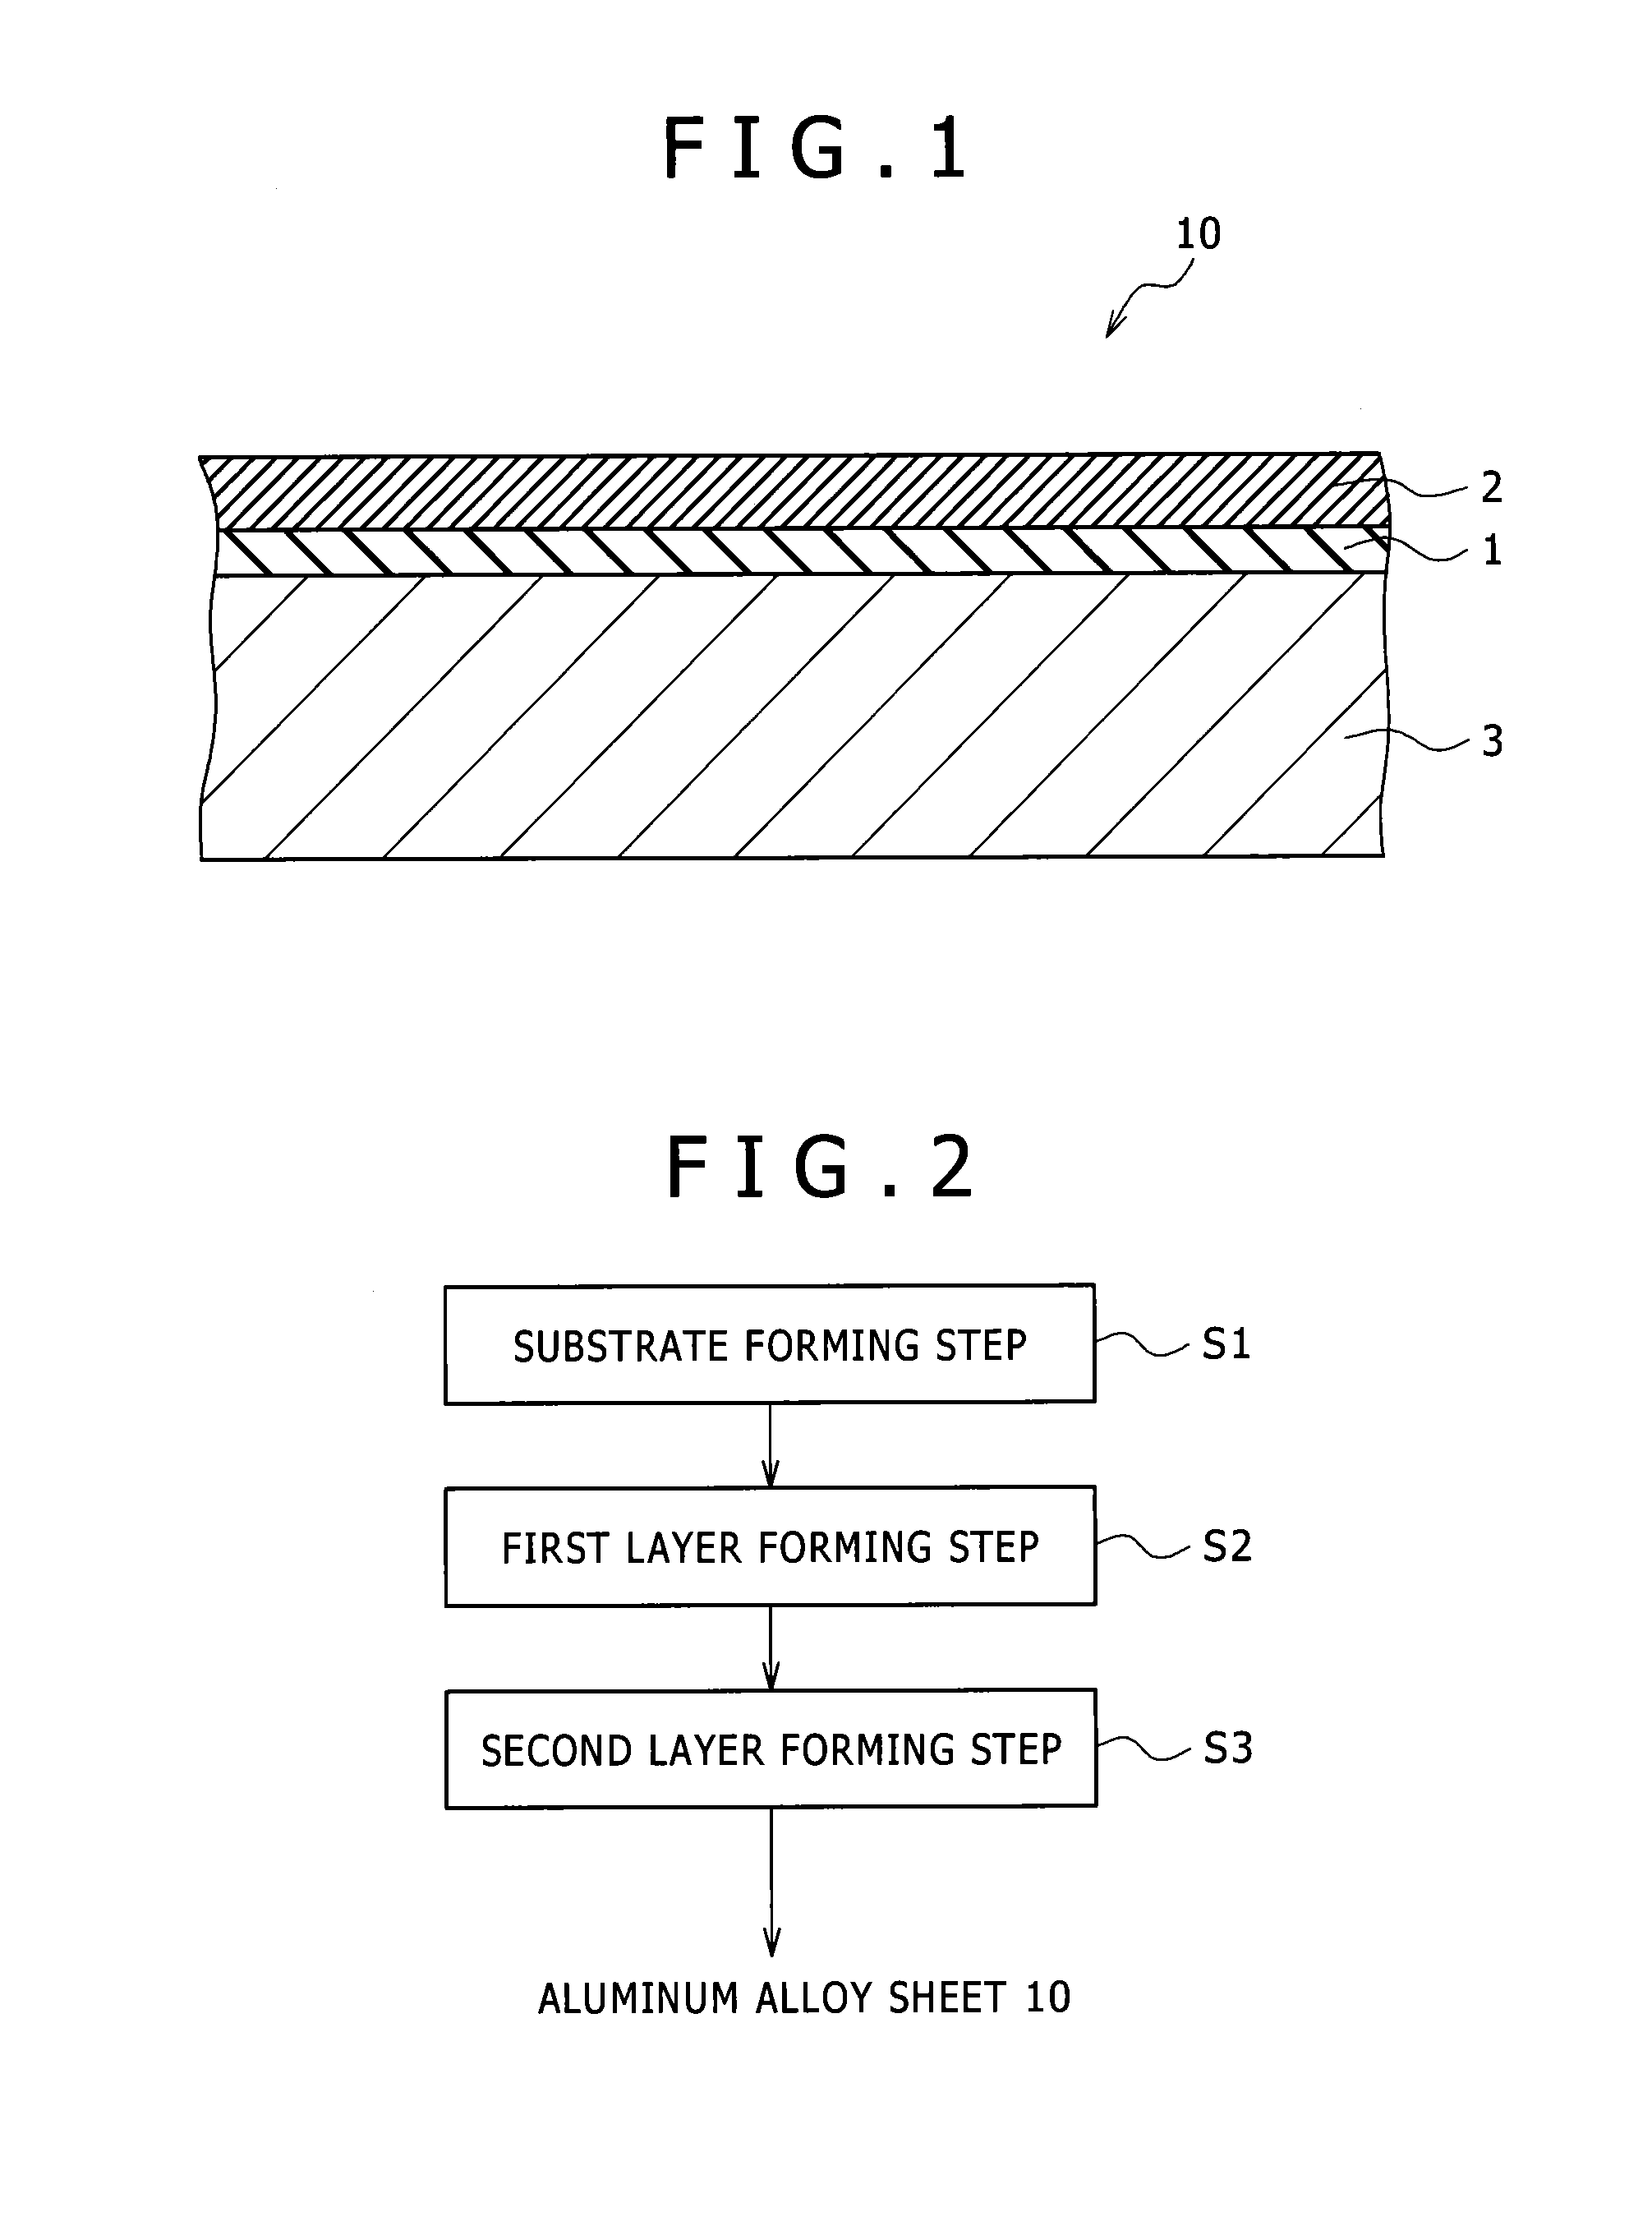 Aluminum alloy sheet, bonded object, and member for motor vehicle